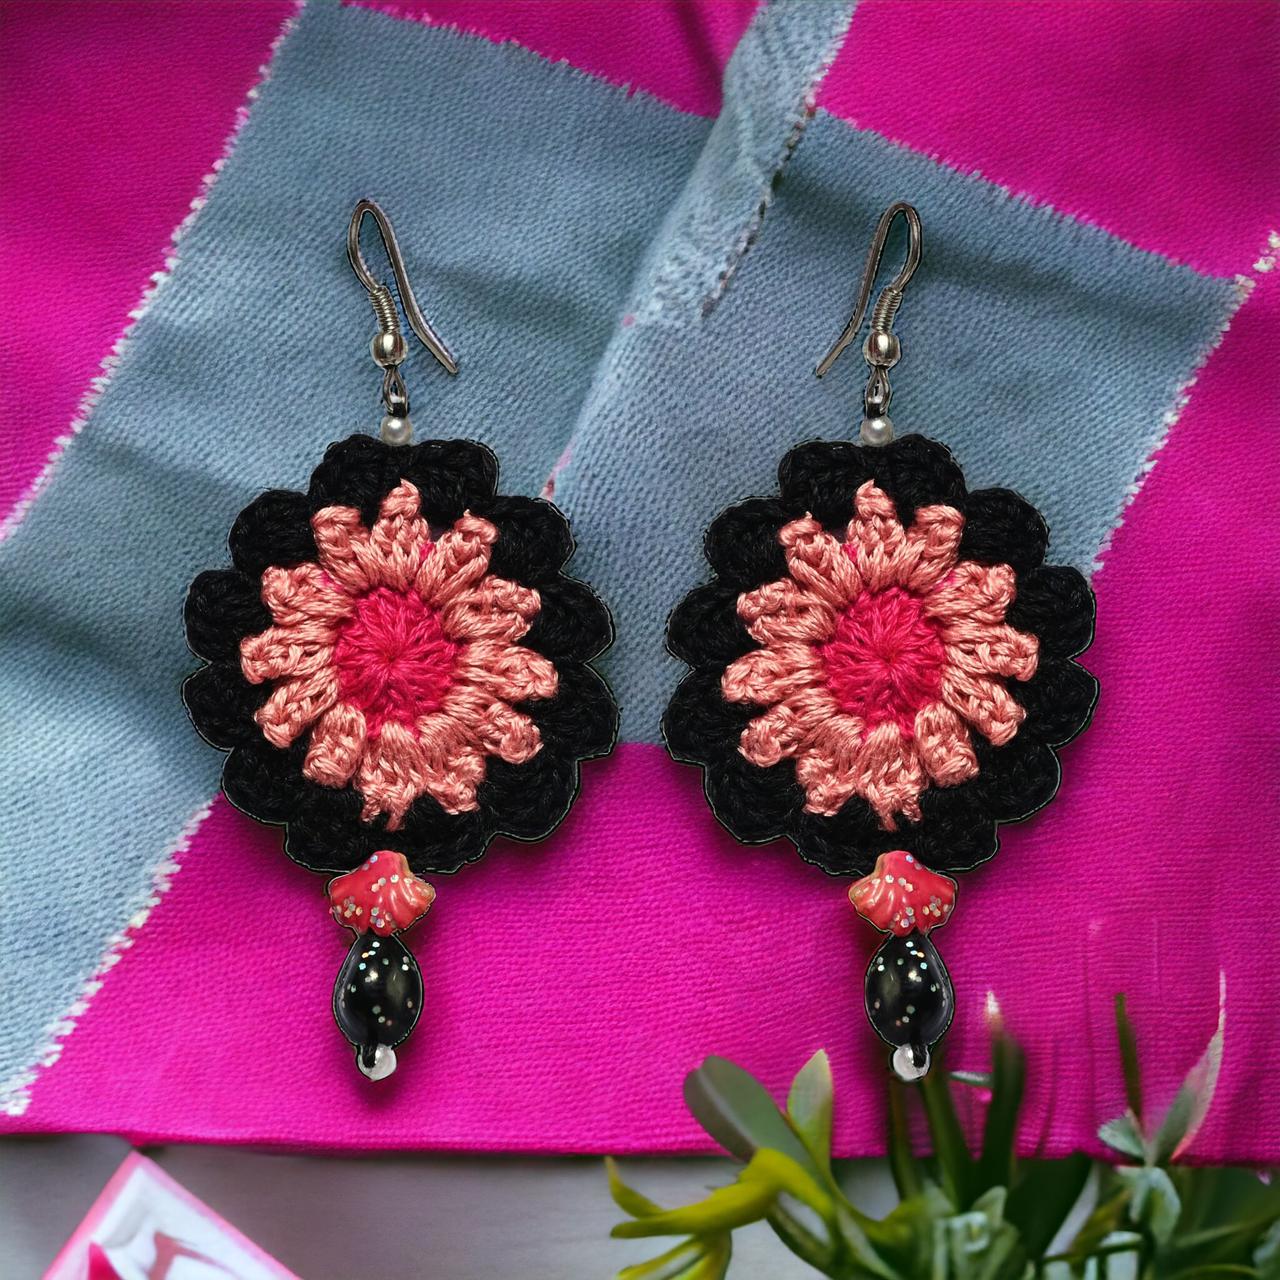 Rounded shaped Crochet earrings pink and black